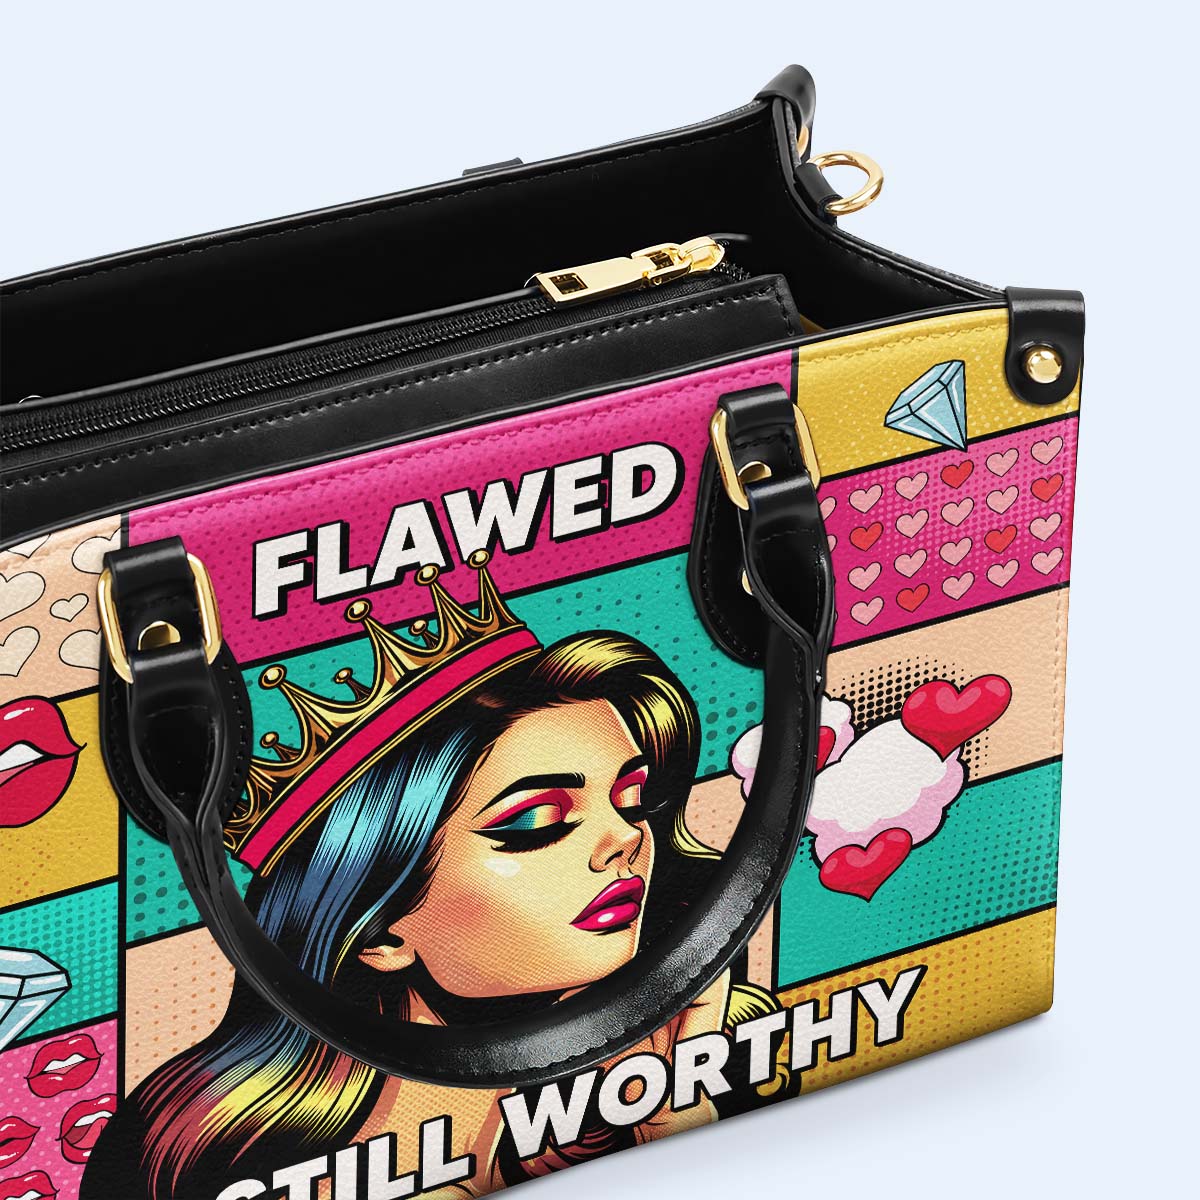 Flawed And Still Worthy - Personalized Leather Handbag - PG18